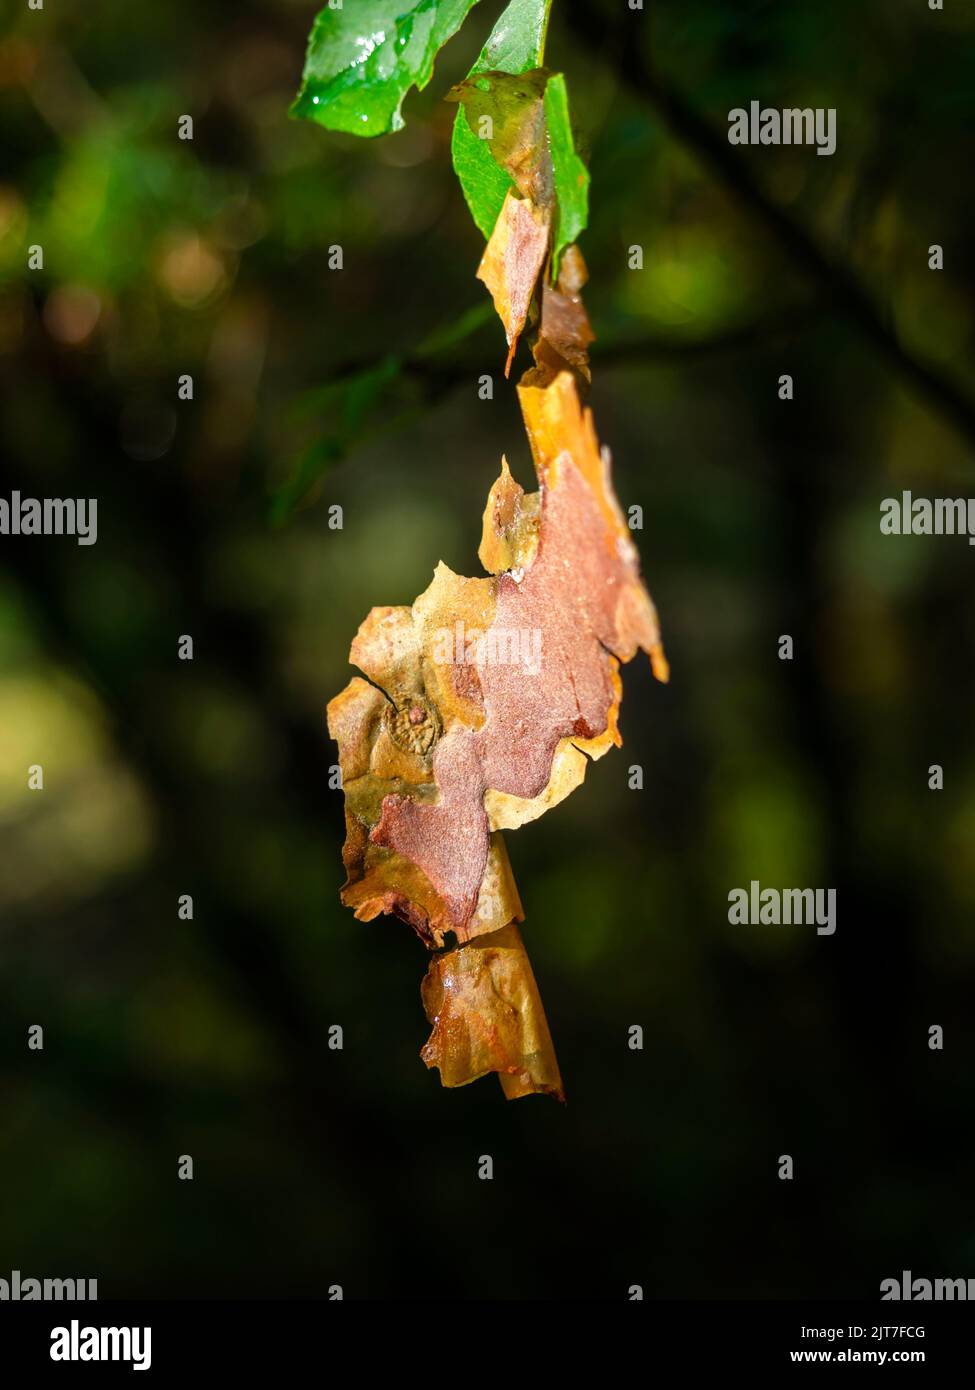 Early Autumn Fall season natural sign signs dried leaf leaves Stock Photo